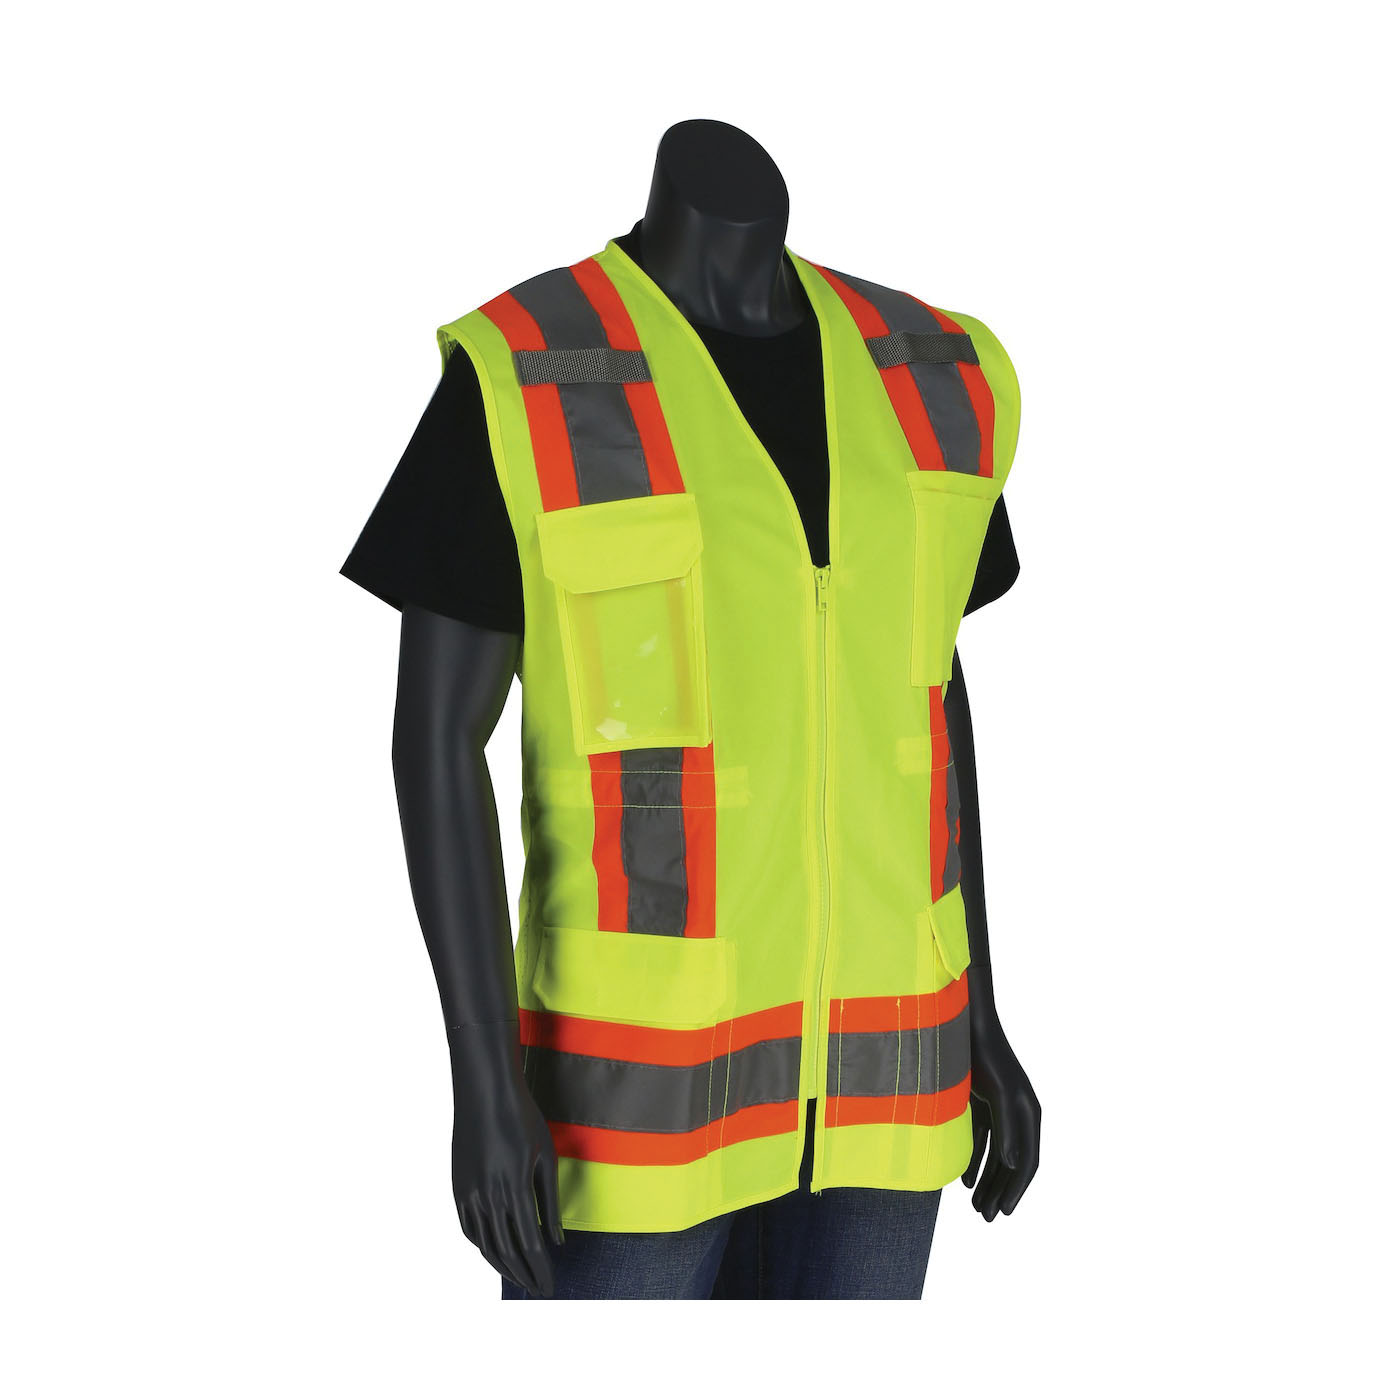 PIP® 302-0512-LY/3X 2-Tone Contoured Surveyor's Vest With Solid Front and Mesh Back, 3XL, Hi-Vis Yellow, 100% Polyester Mesh/Solid Tricot Knit, Zipper Closure, 11 Pockets, ANSI Class: Type/Class R2